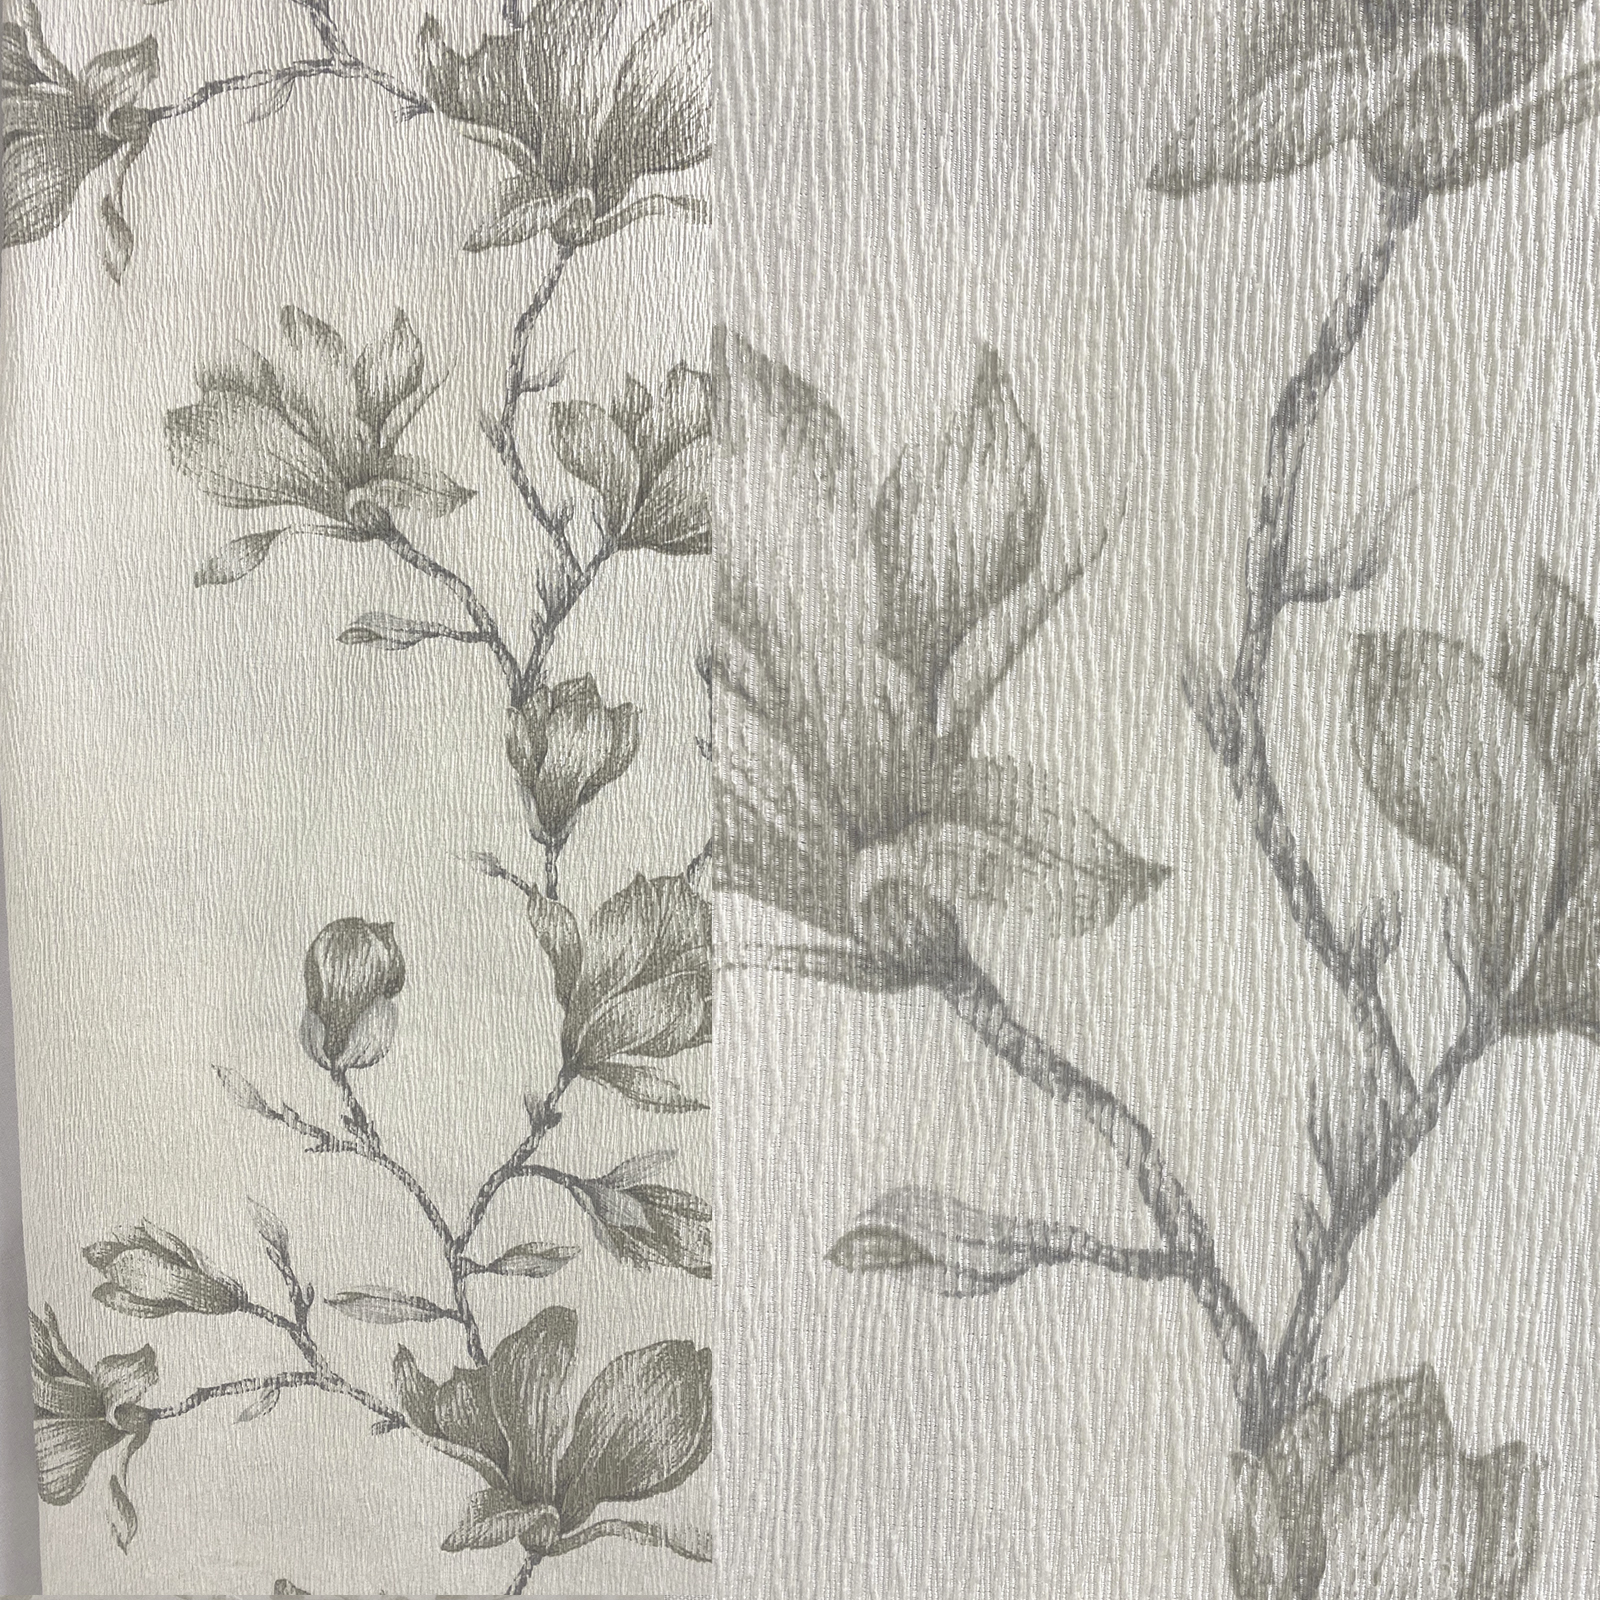 Covering fabric for curtains and upholstery, printed with a floral design.<br /> 100% Made in Italy fabric. Style classic with flowers decorations.

 Treatments: indanthrene. Type of workings: pigment print. 